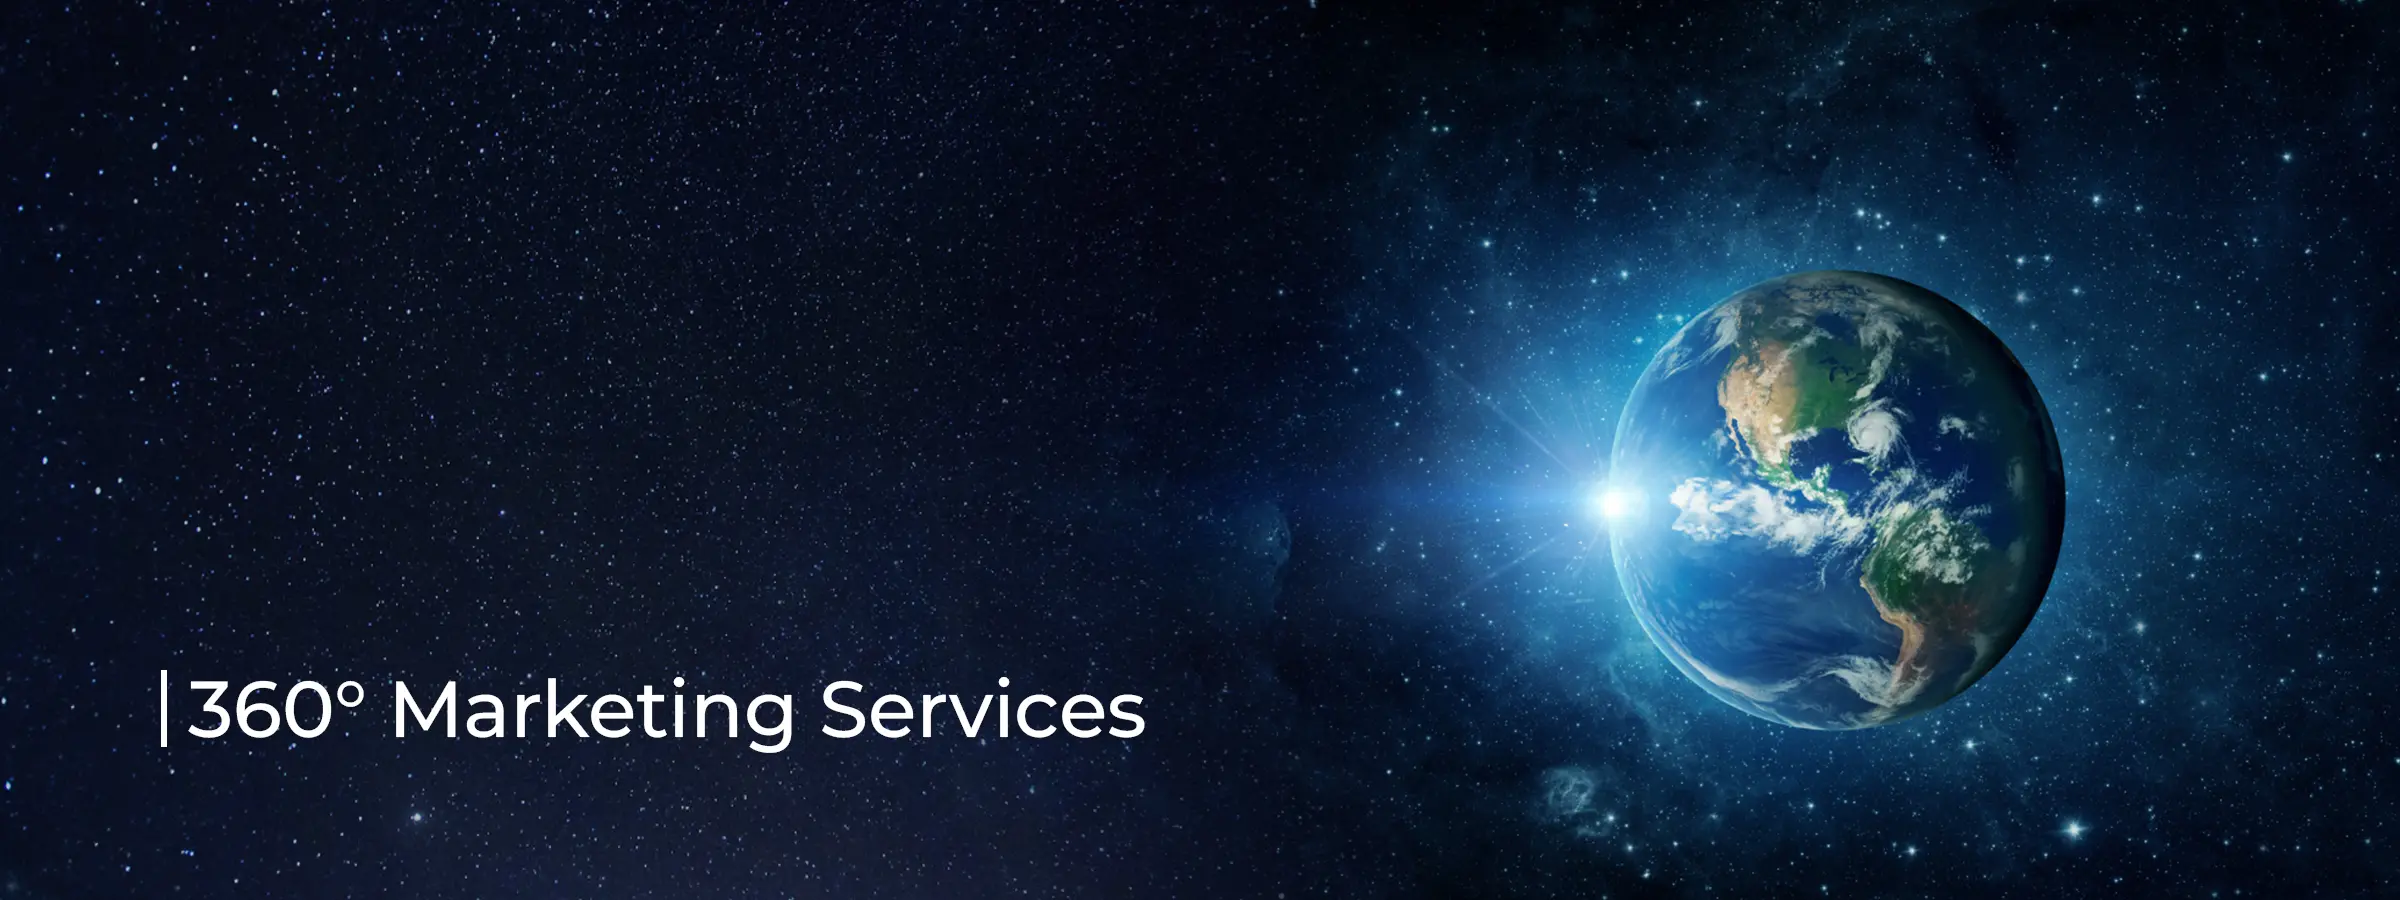 offerings-services-marketing-banner